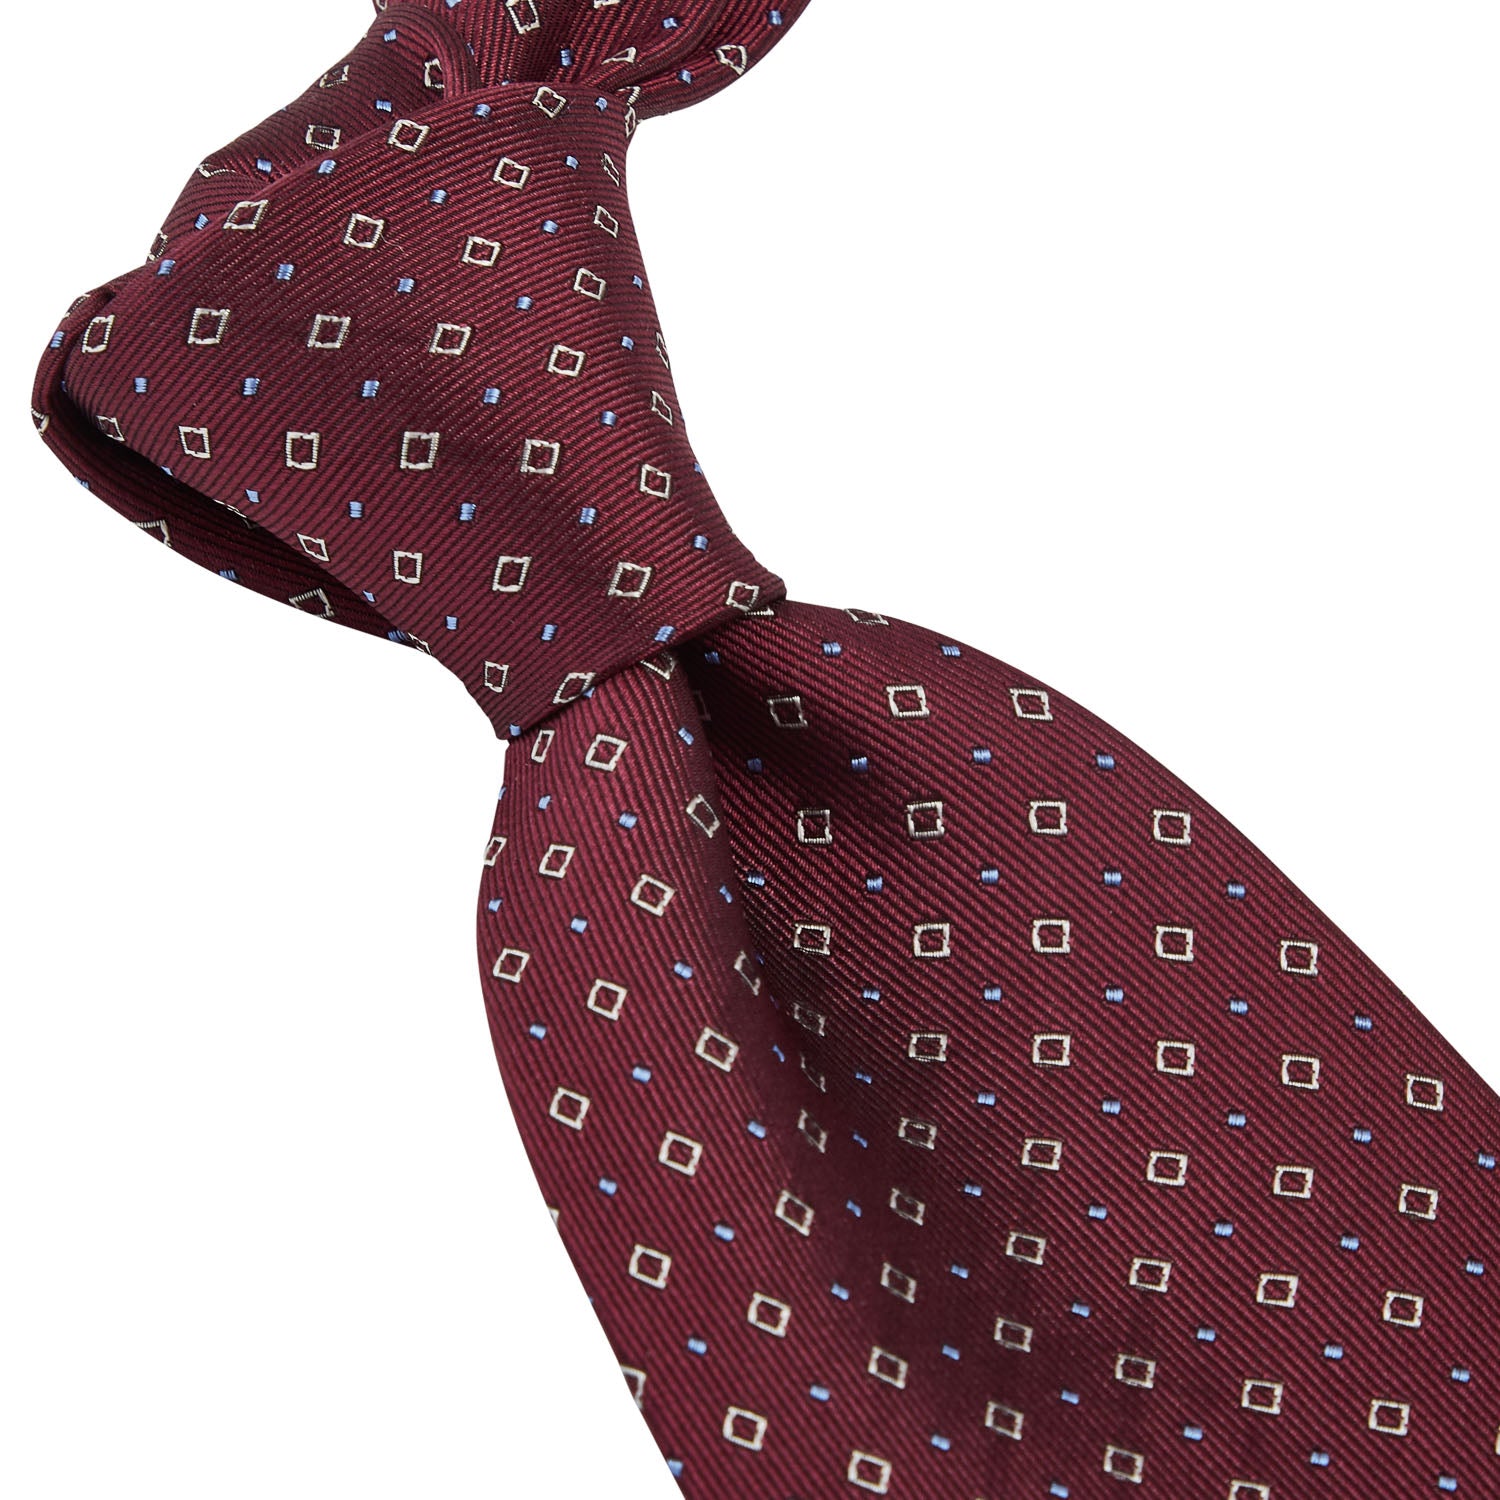 A Sovereign Grade Oxblood Alternating Square Dot Jacquard tie of the highest quality from KirbyAllison.com.